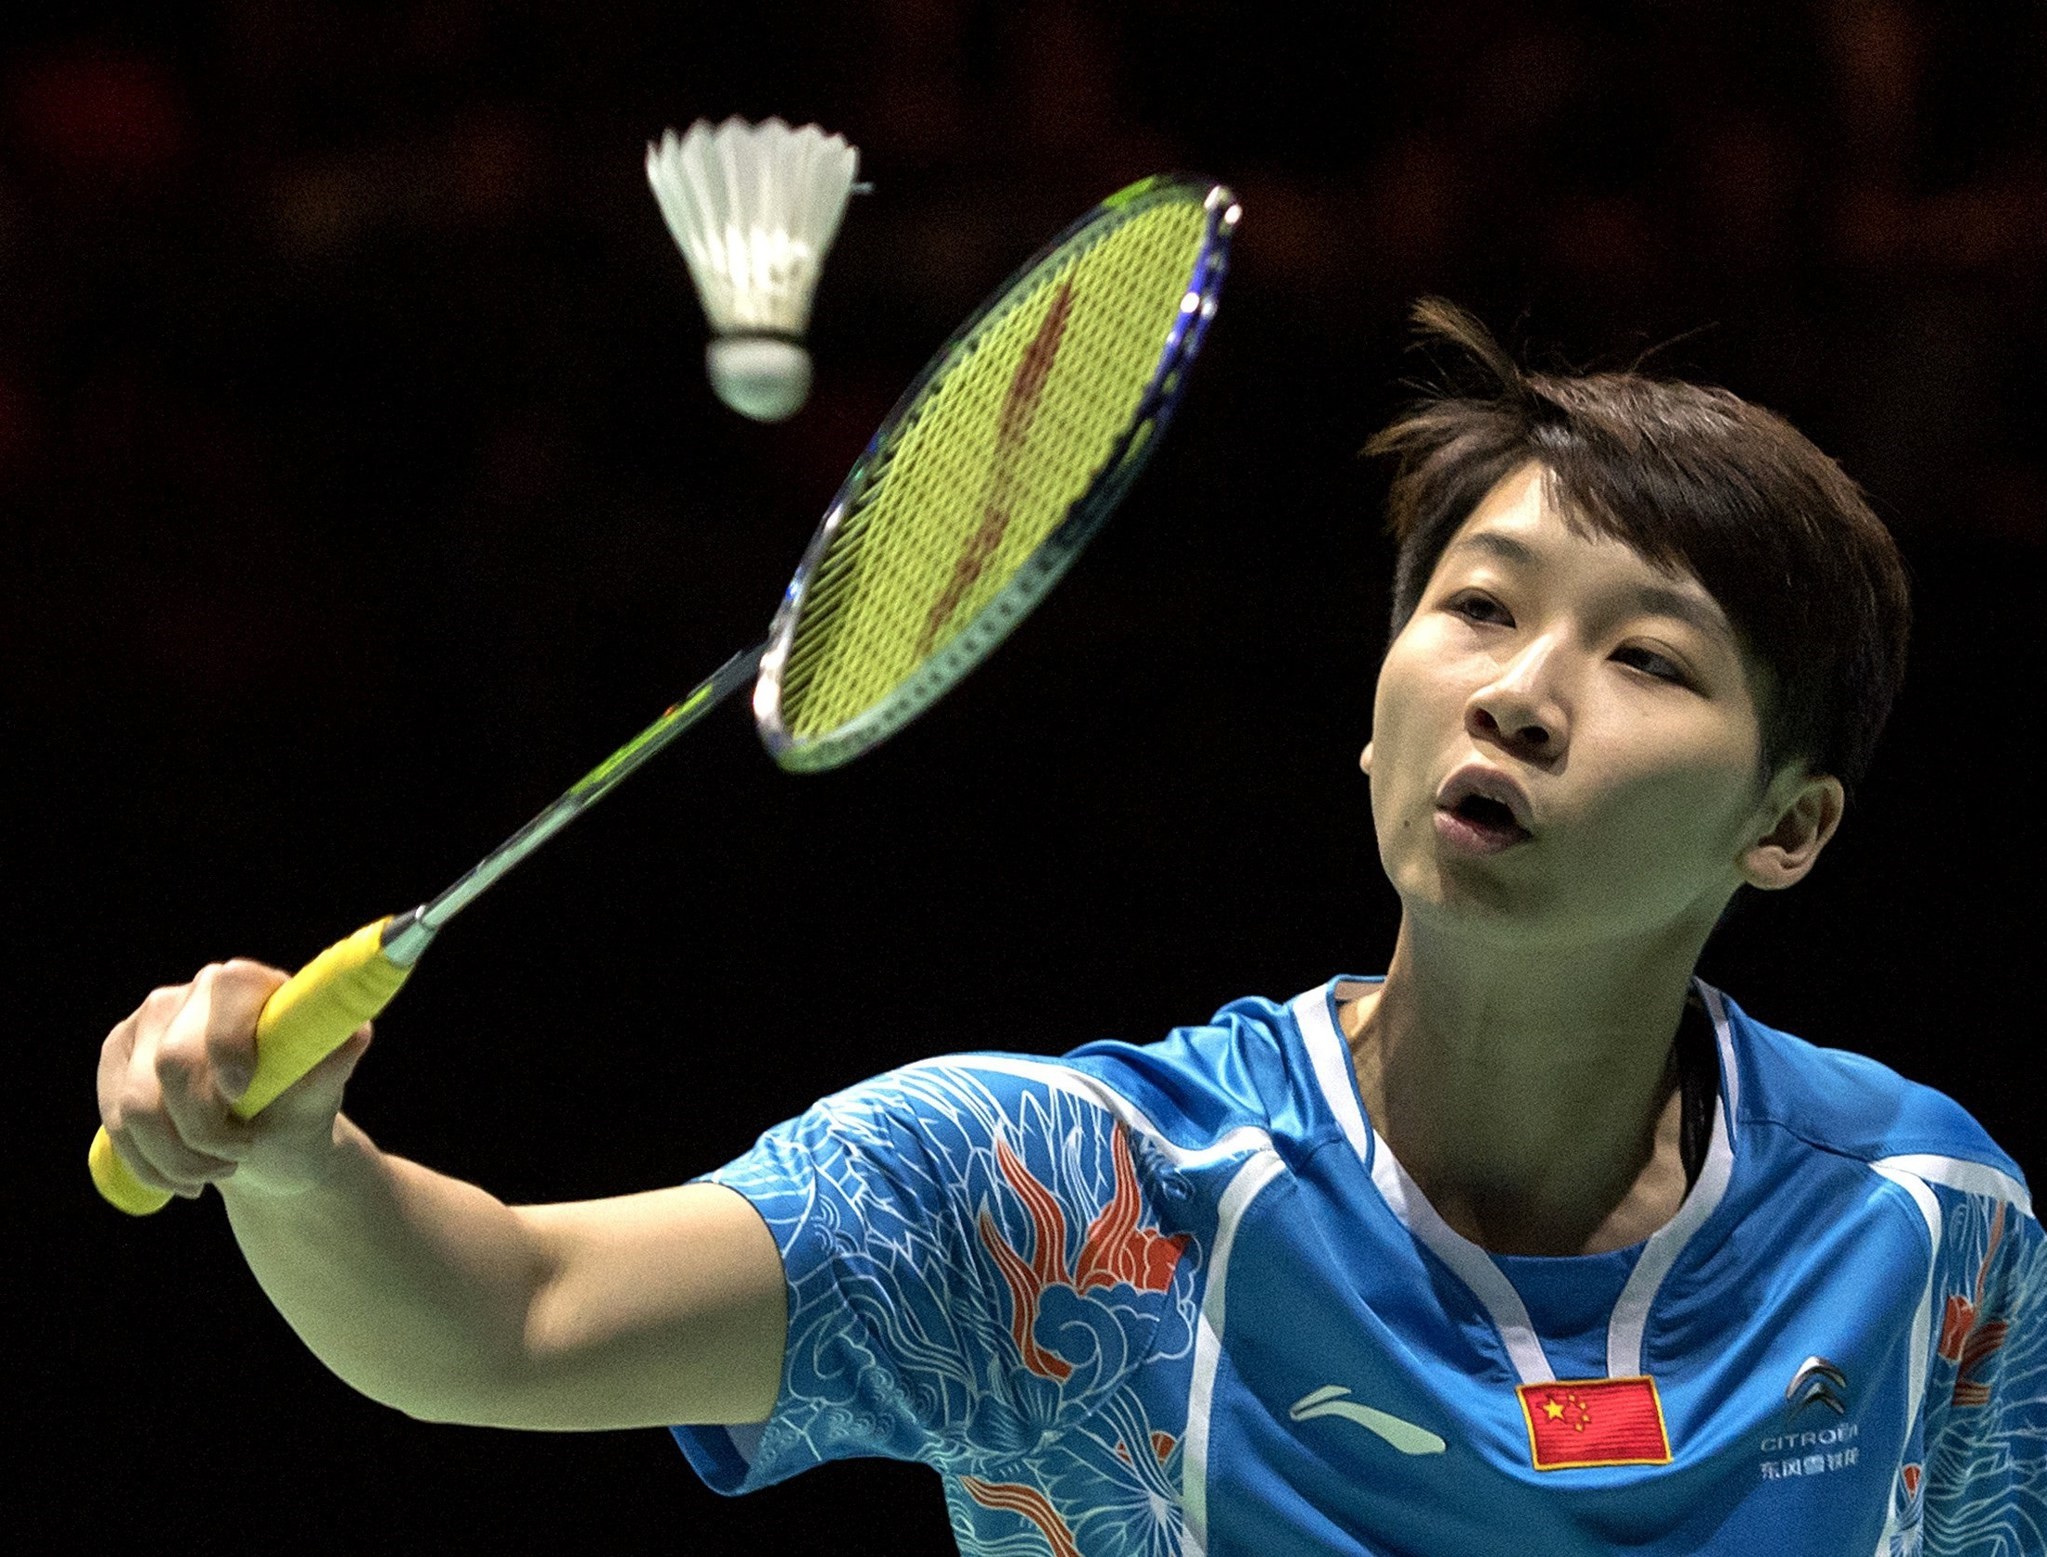 Chinau2019s Chen Xiaoxin returns a shuttlecock to Chinau2019s Chen Yufei during their womenu2019s singles final match at the Badminton Swiss Open tournament in the St. Jakobshalle in Basel, Switzerland.